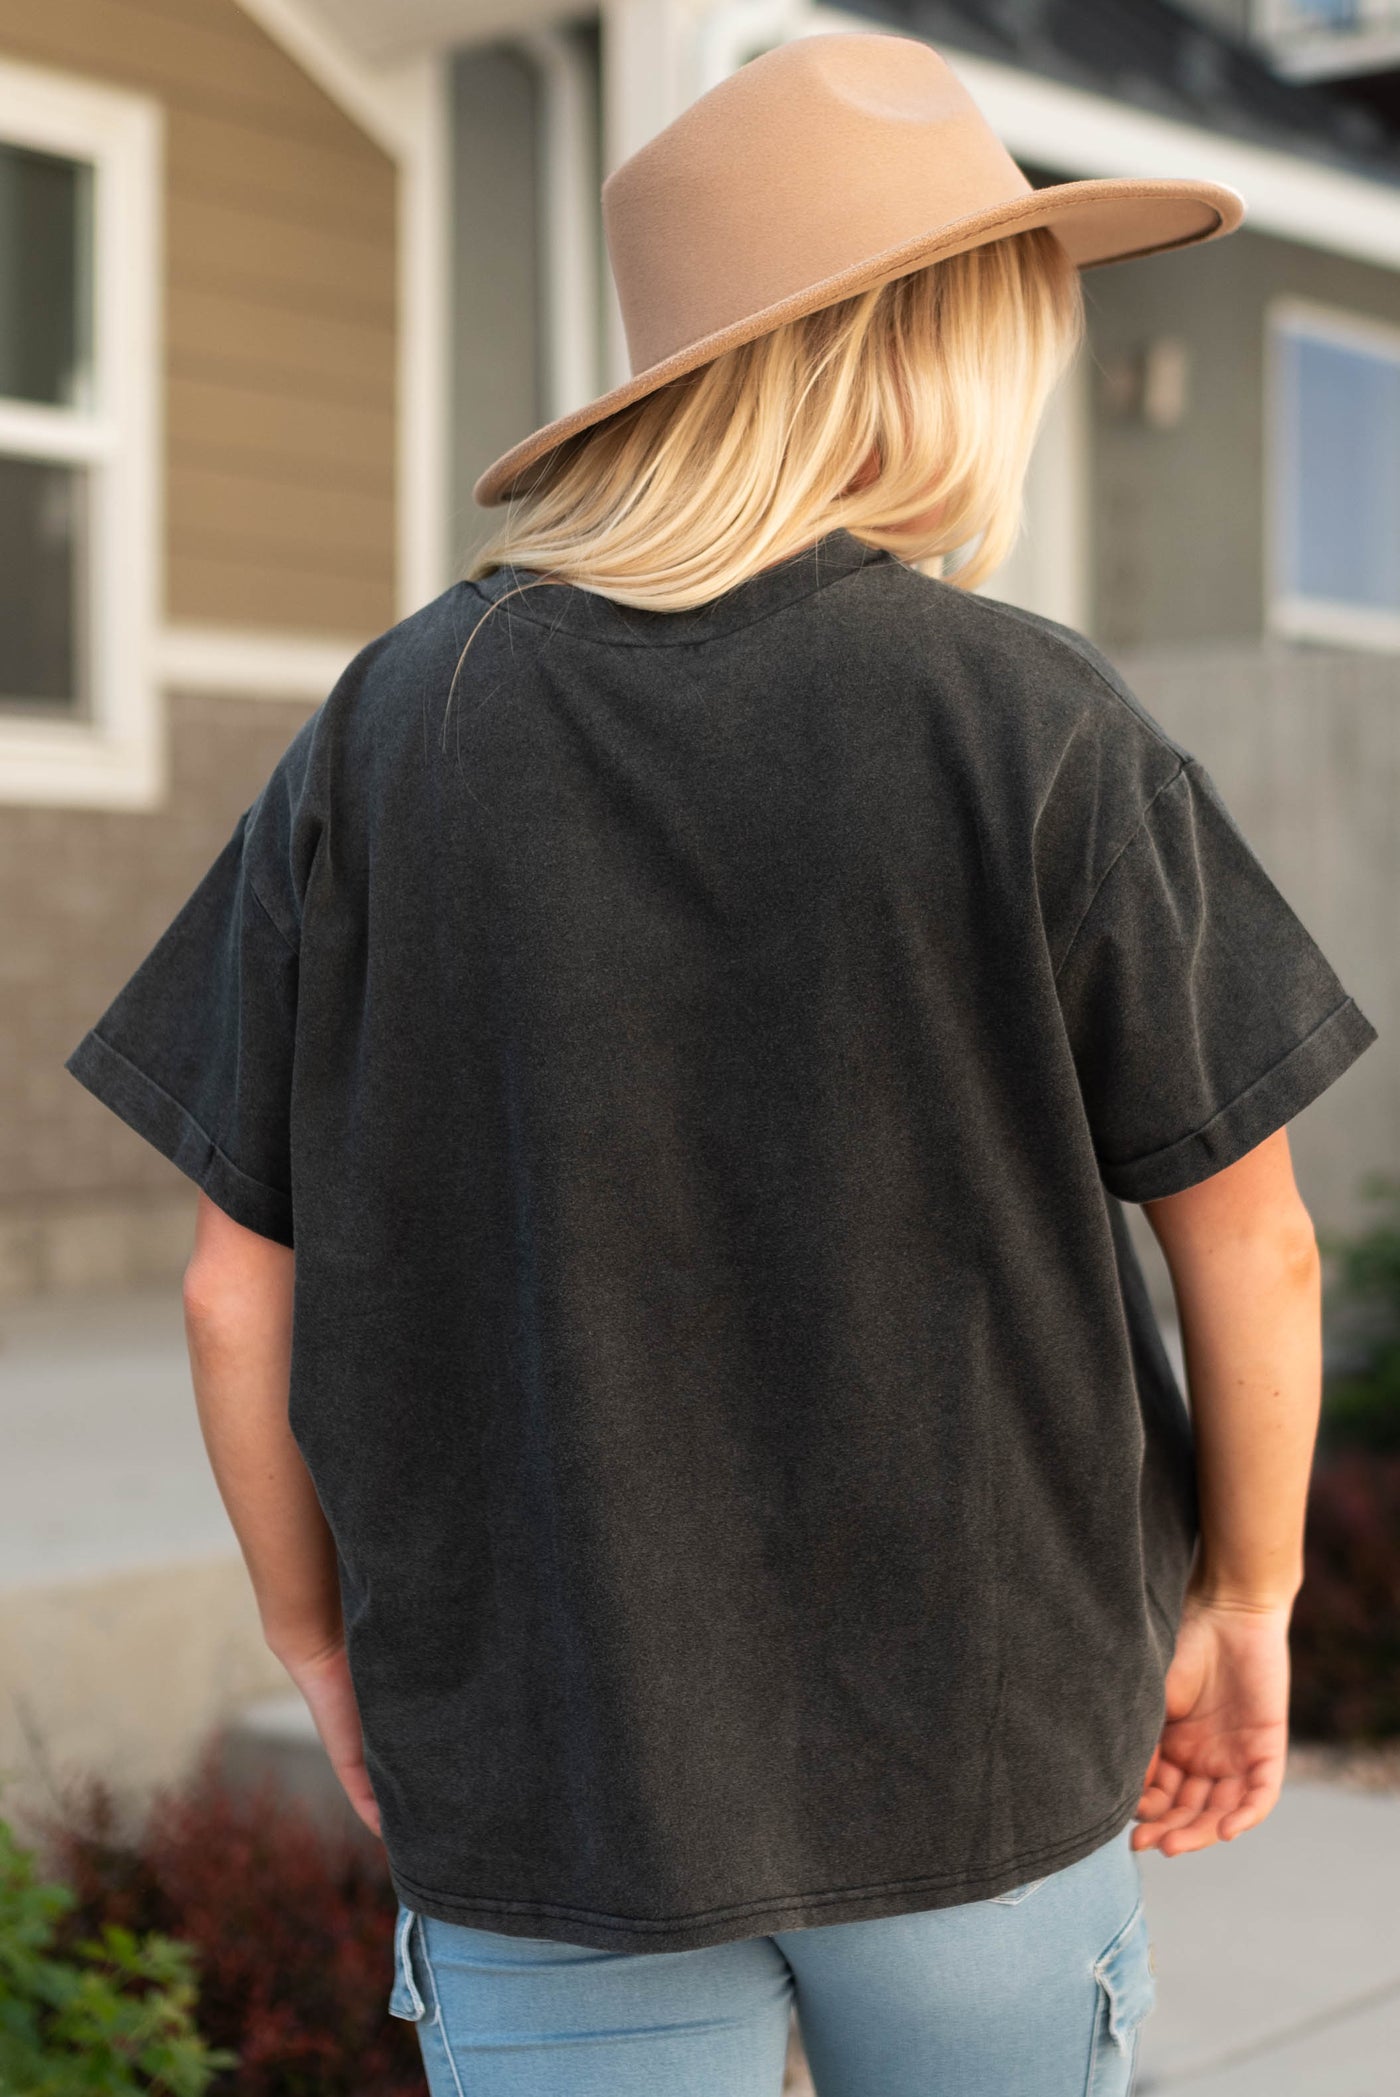 Back view of a drifter black tee